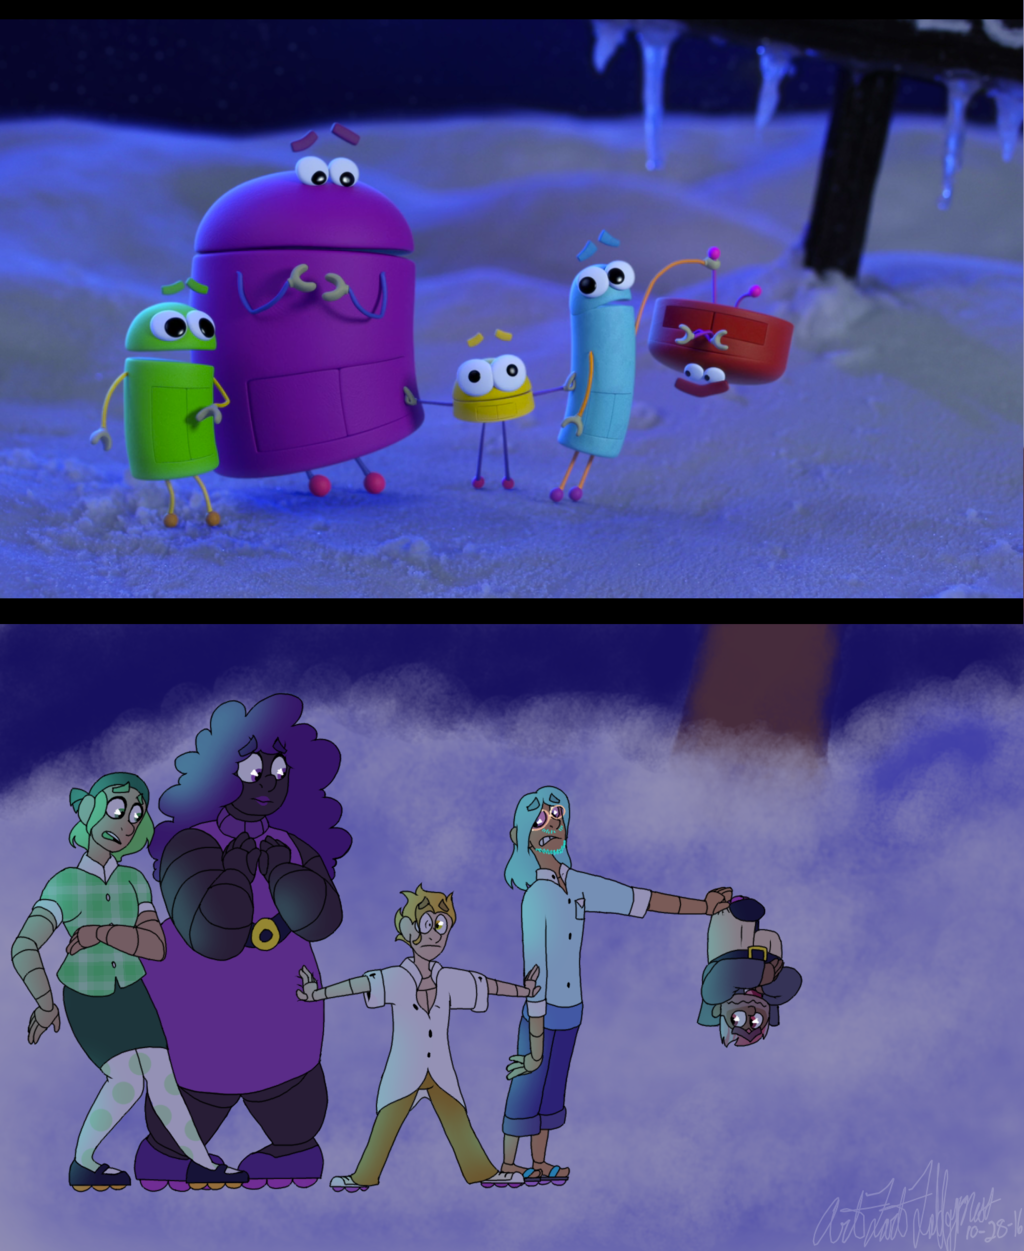 Most recent image: Ask the Storybots Screenshot Redraw!